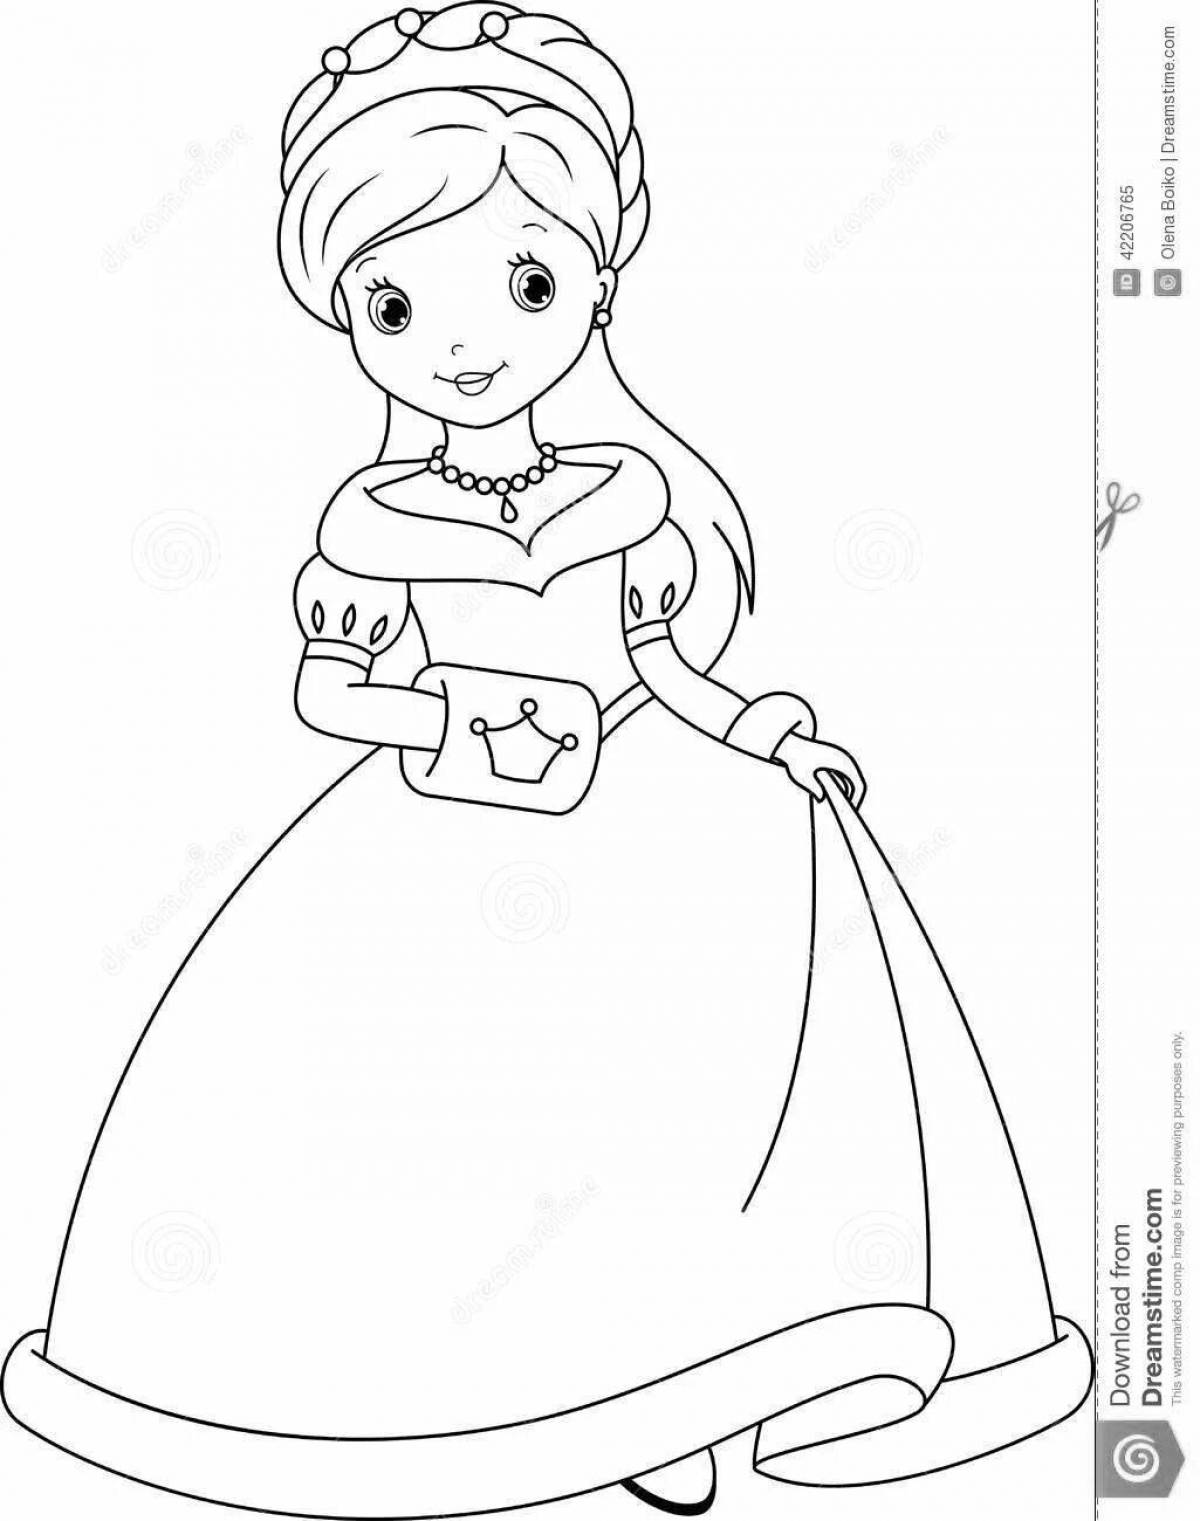 Fancy coloring book for 3 year old girls, princess